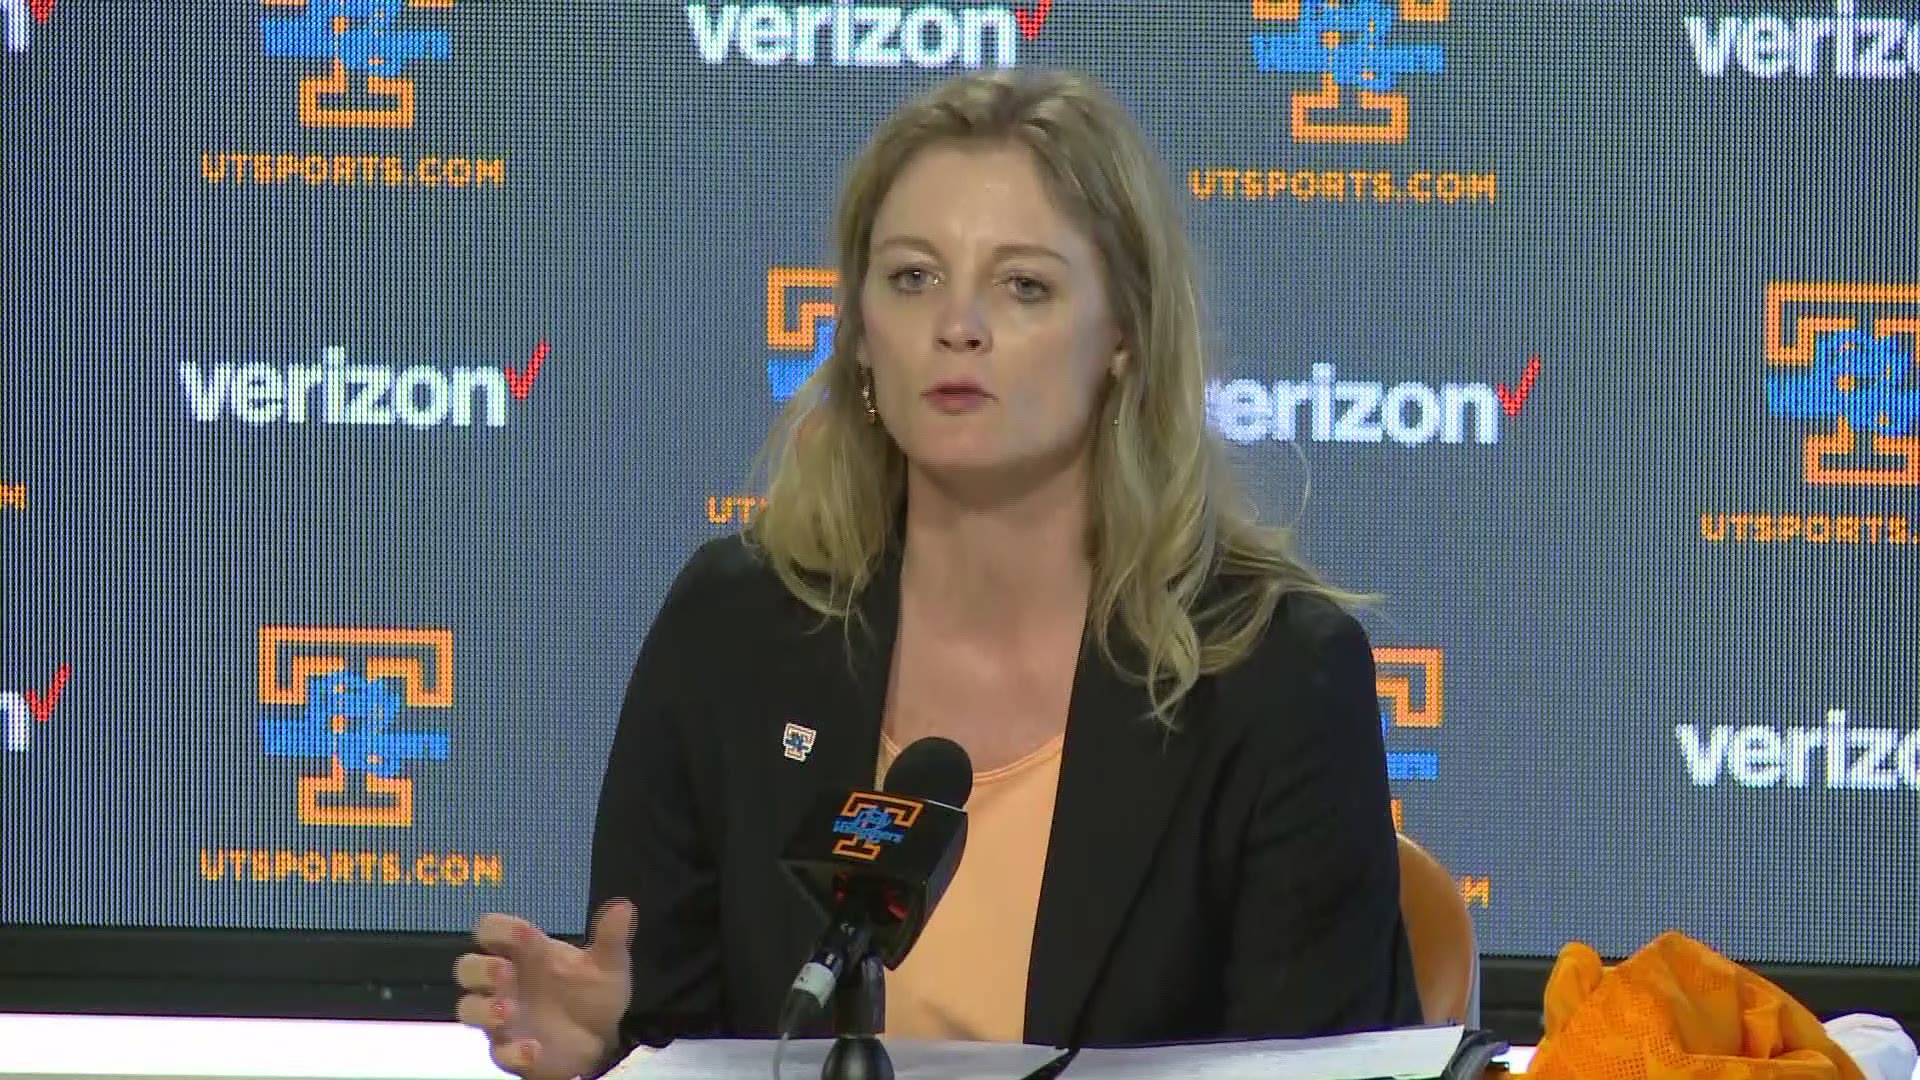 Kellie Harper is the new head coach of the Lady Vols basketball program. The school officially introduced her on Wednesday afternoon. Harper played for Tennessee from 1995 to 1999, winning three national championships under Pat Summit.